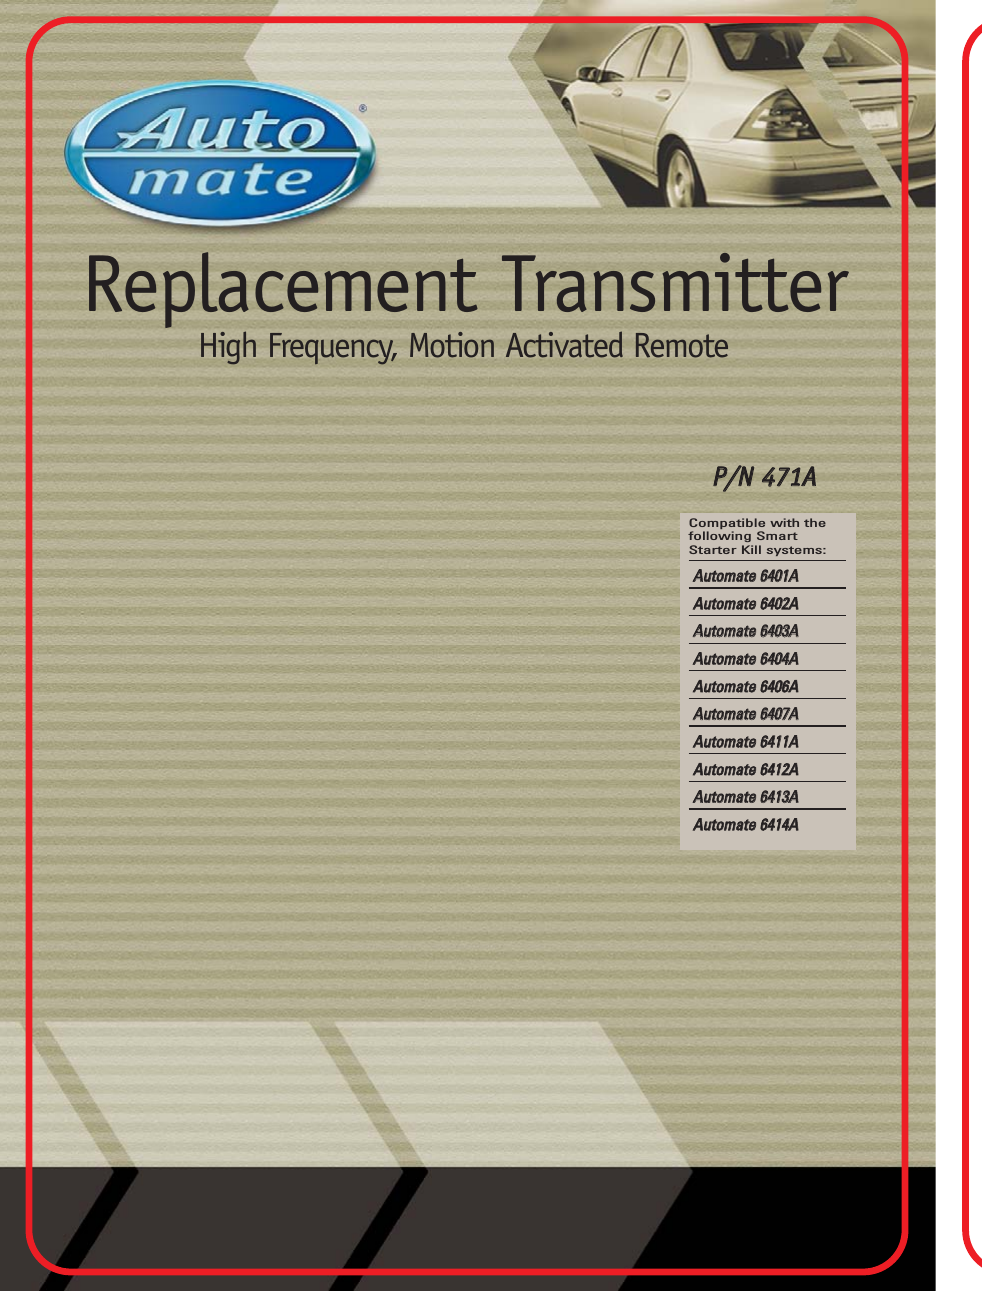 Replacement TransmitterHigh Frequency, Motion Activated RemotePP//NN  447711AACompatible with thefollowing SmartStarter Kill systems:AAuuttoommaattee  66440011AAAAuuttoommaattee  66440022AAAAuuttoommaattee  66440033AAAAuuttoommaattee  66440044AAAAuuttoommaattee  66440066AAAAuuttoommaattee  66440077AAAAuuttoommaattee  66441111AAAAuuttoommaattee  66441122AAAAuuttoommaattee  66441133AAAAuuttoommaattee  66441144AA